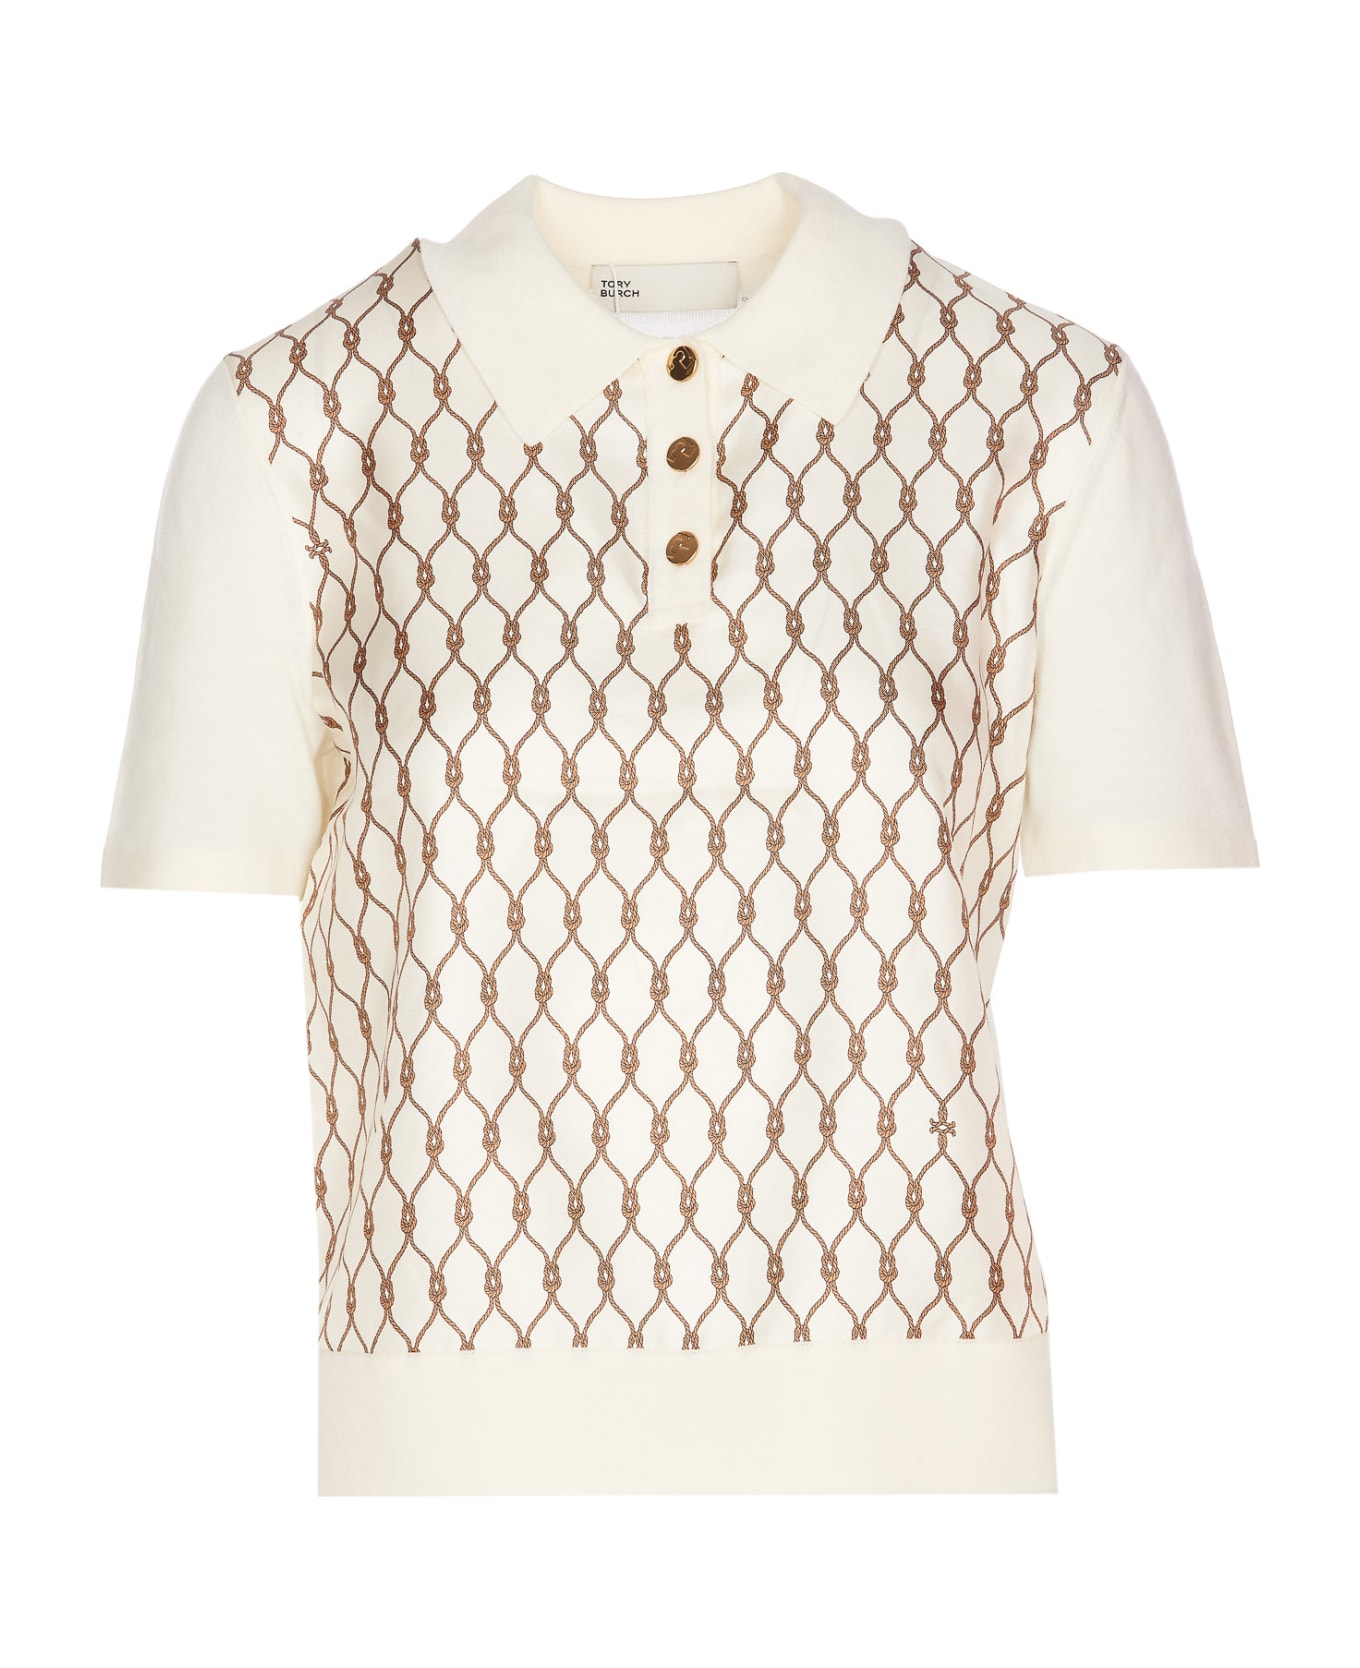 Tory Burch Polo - New Ivory Brown Knot